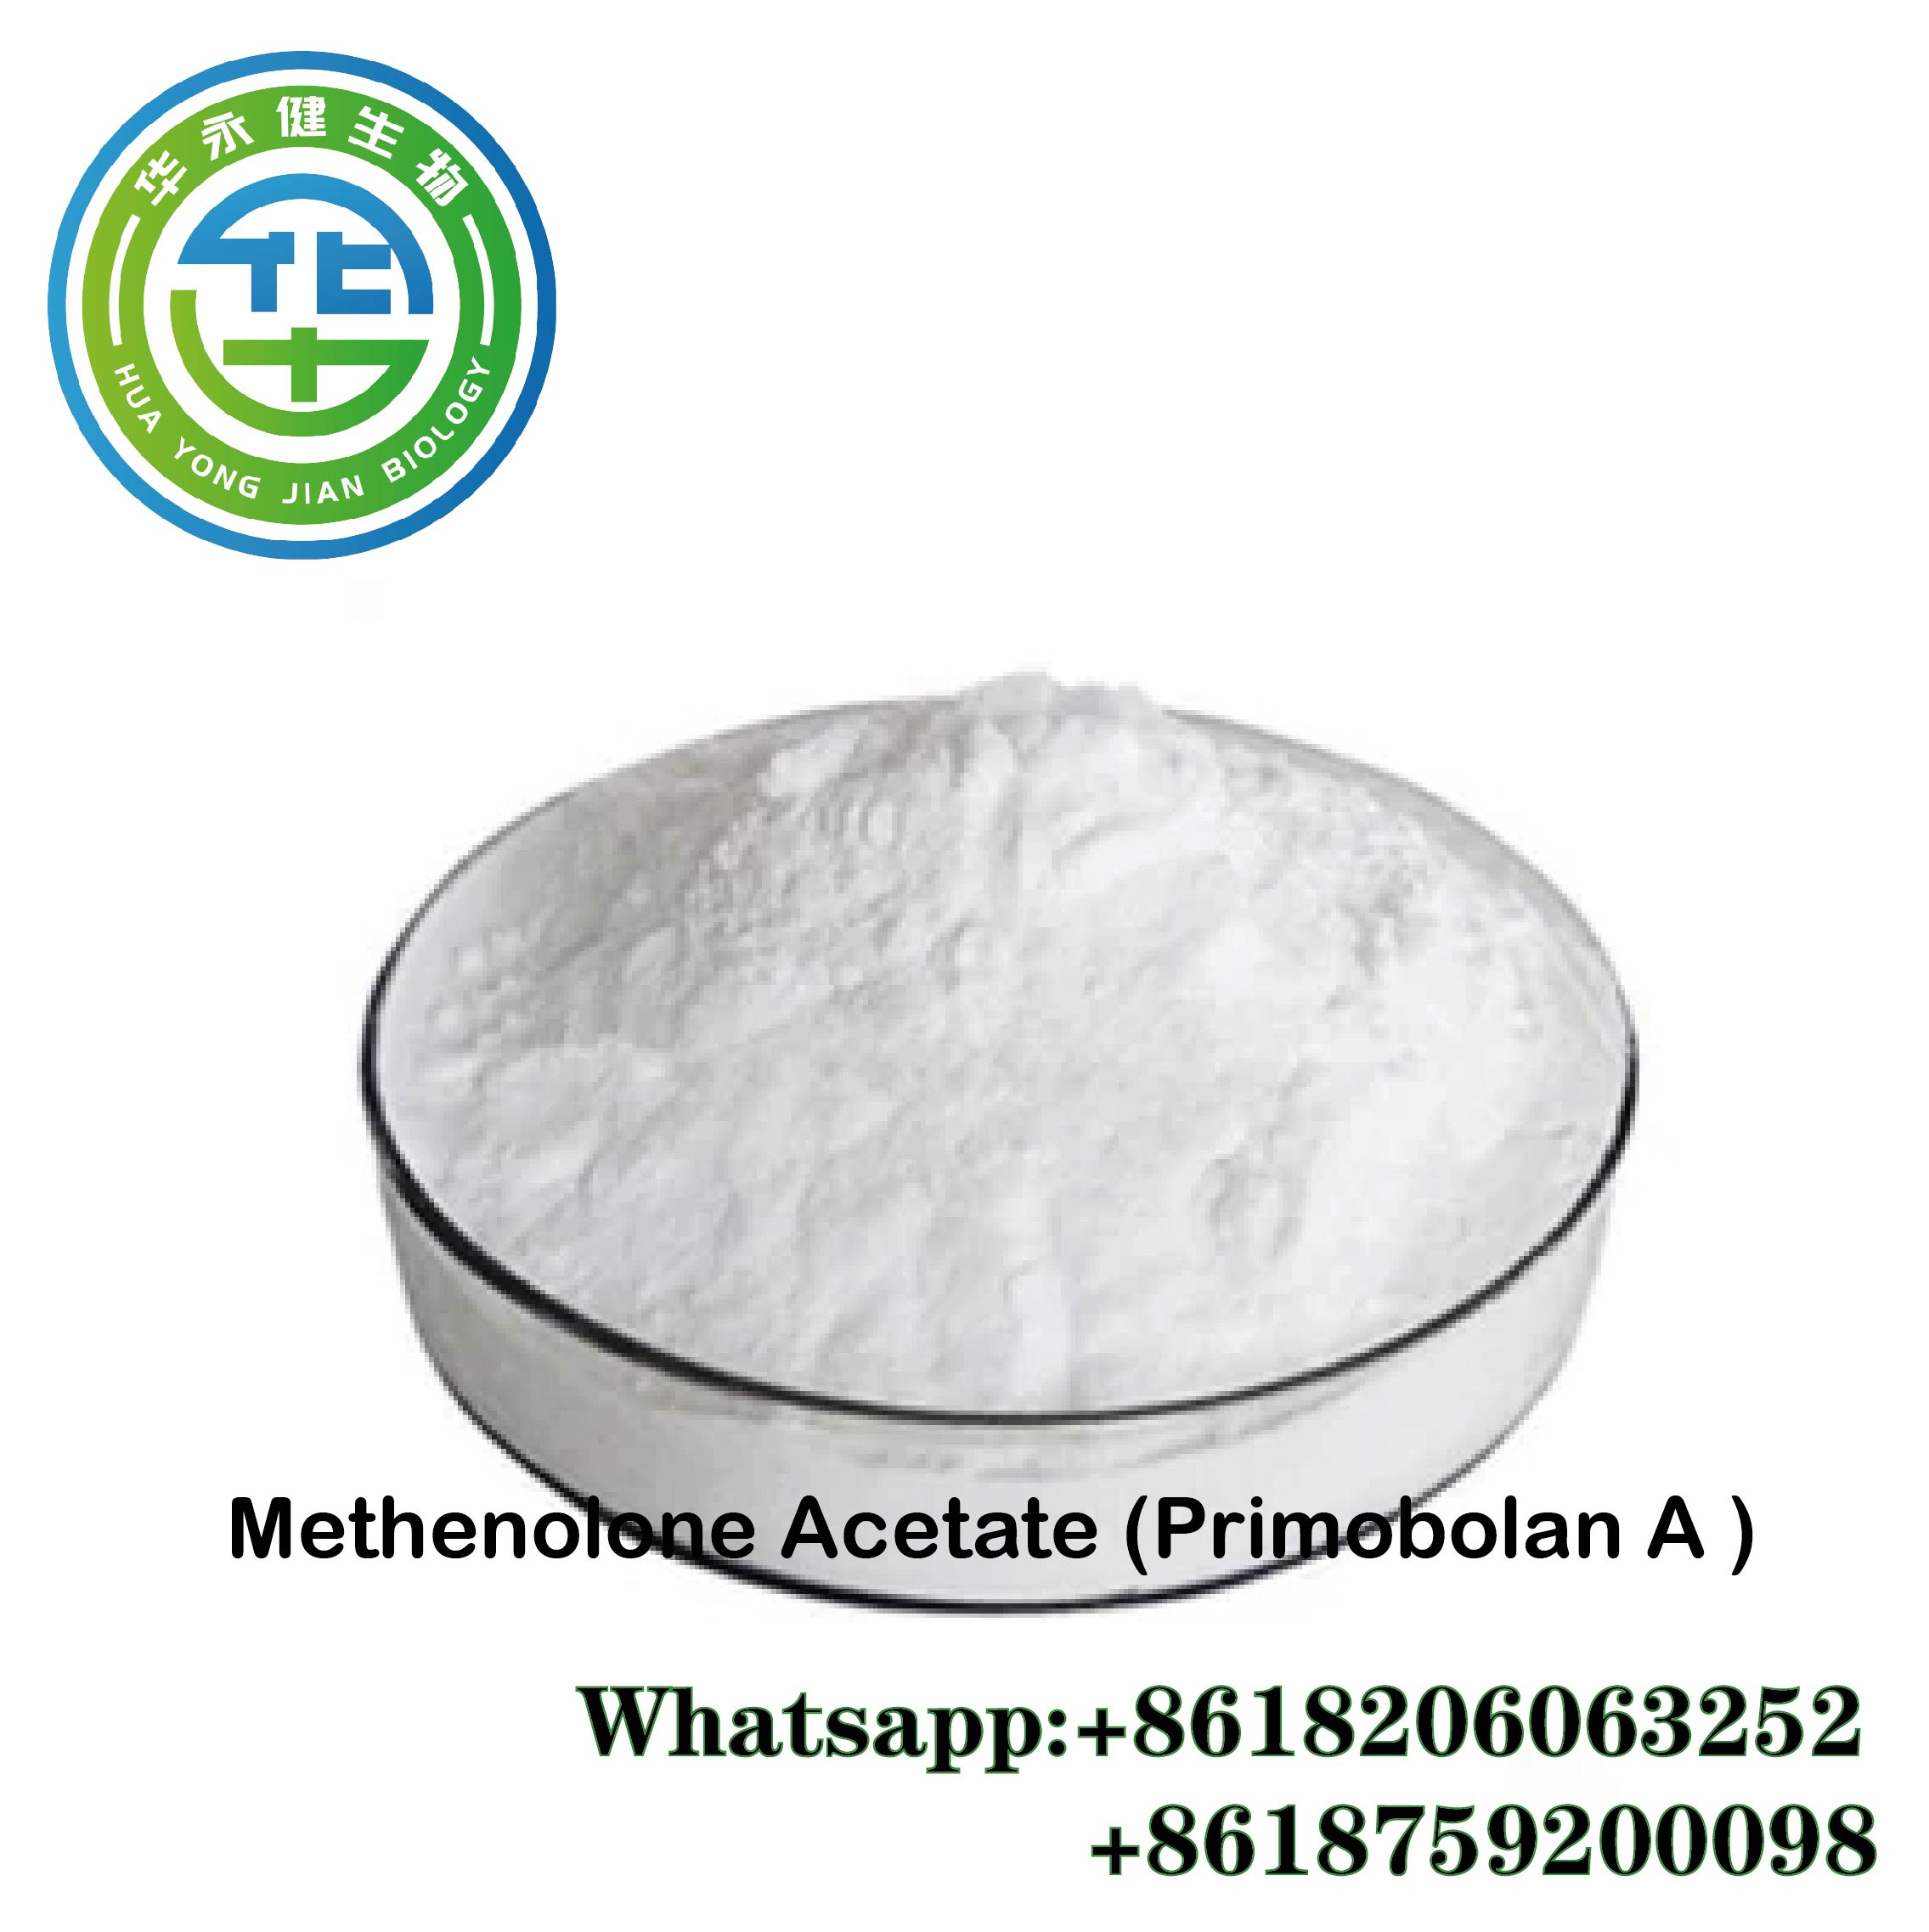  Methenolone Acetate Pharmaceutical Chemicals Primobolan A Steroids Hormone with Competitive Price 